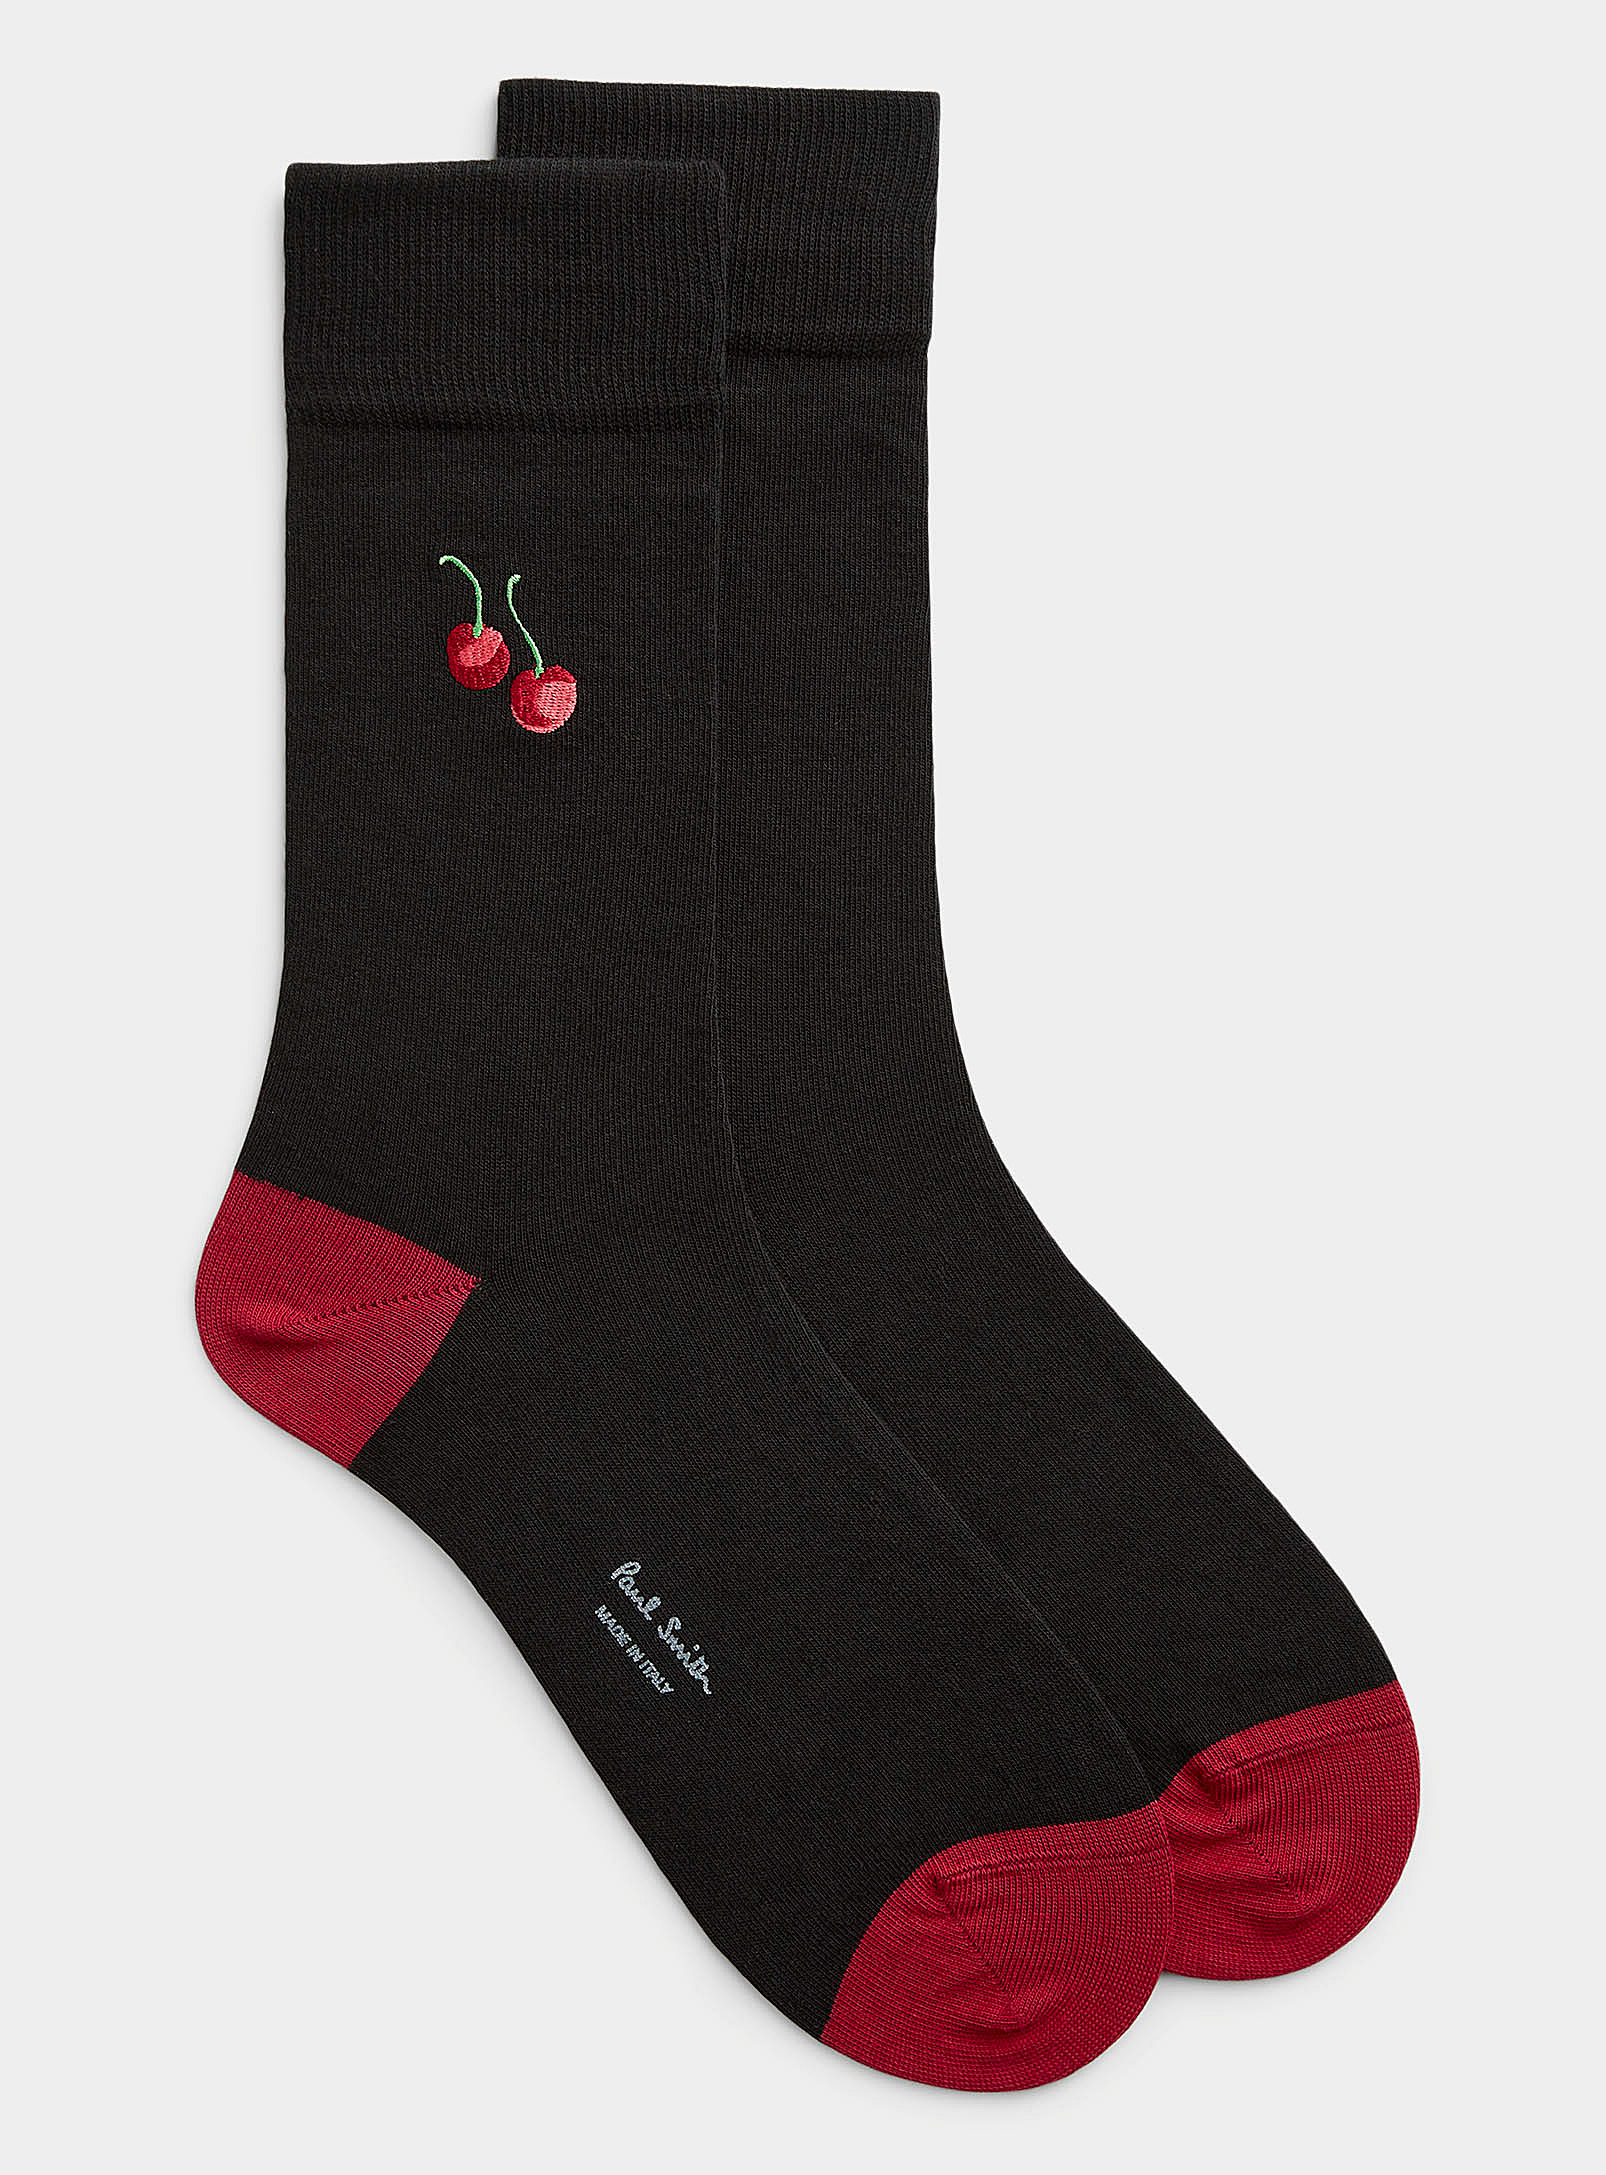 Paul Smith Embroidered Fruit Sock In Black